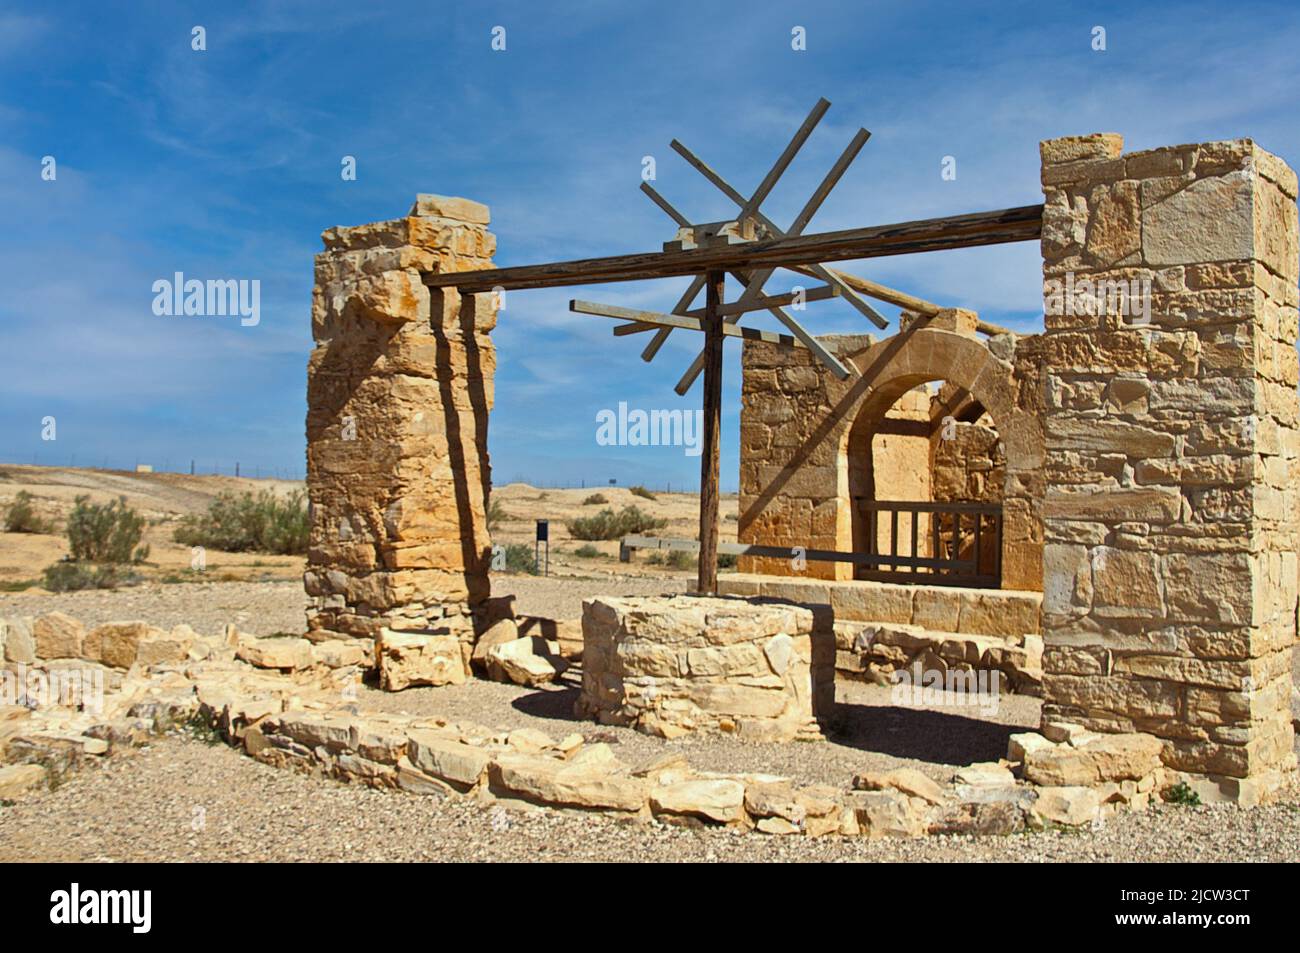 Water well at the Qusyar Amra desert castle in the eastern part of Jordan Stock Photo